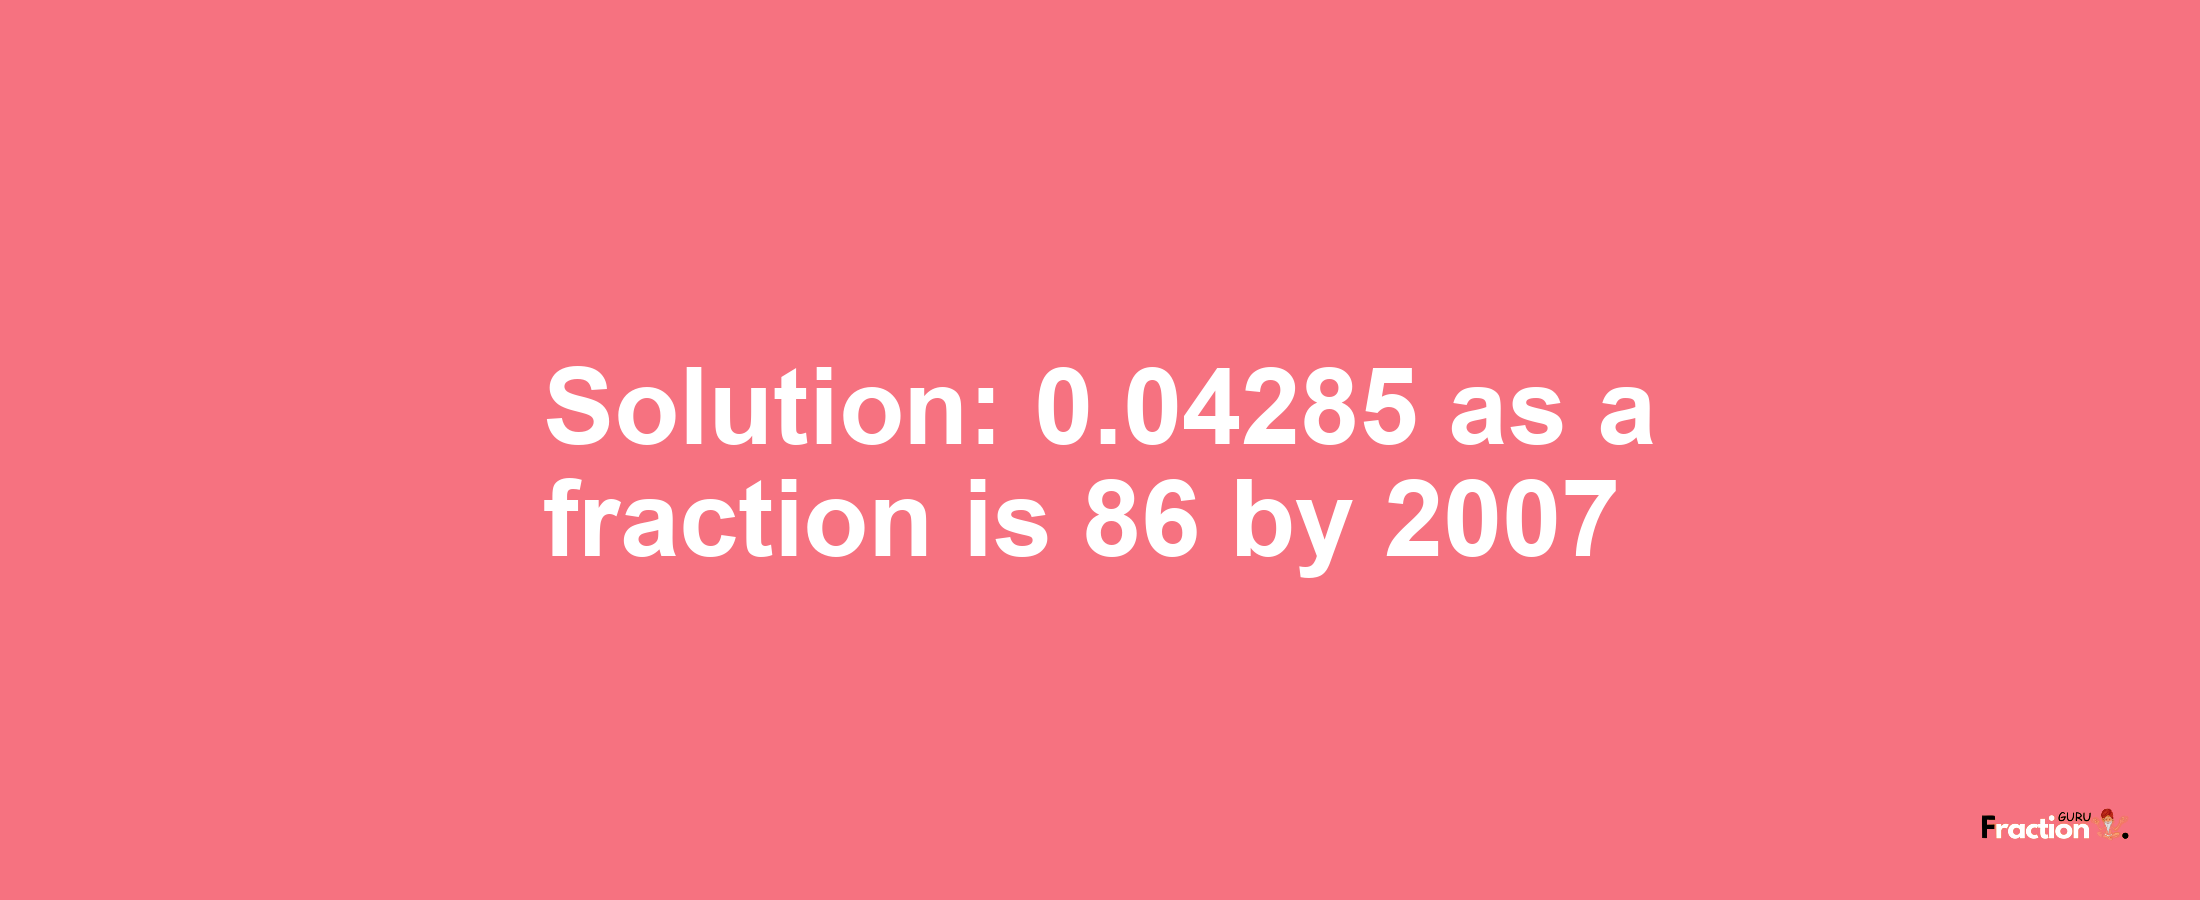 Solution:0.04285 as a fraction is 86/2007